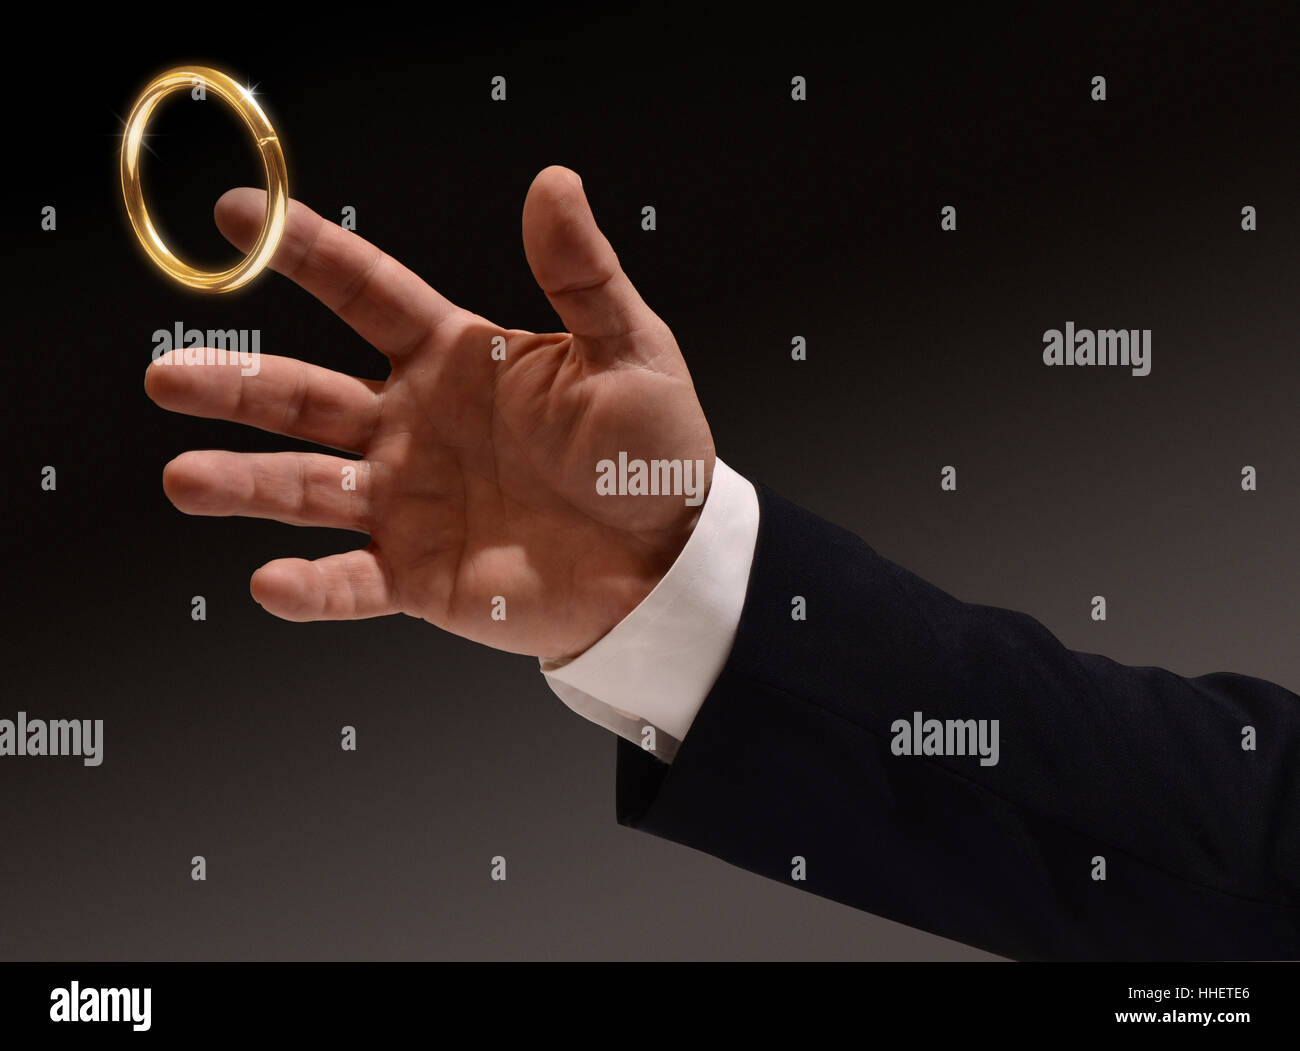 ring, brass, business man, businessman, opportunity, success, hand, ring, Stock Photo